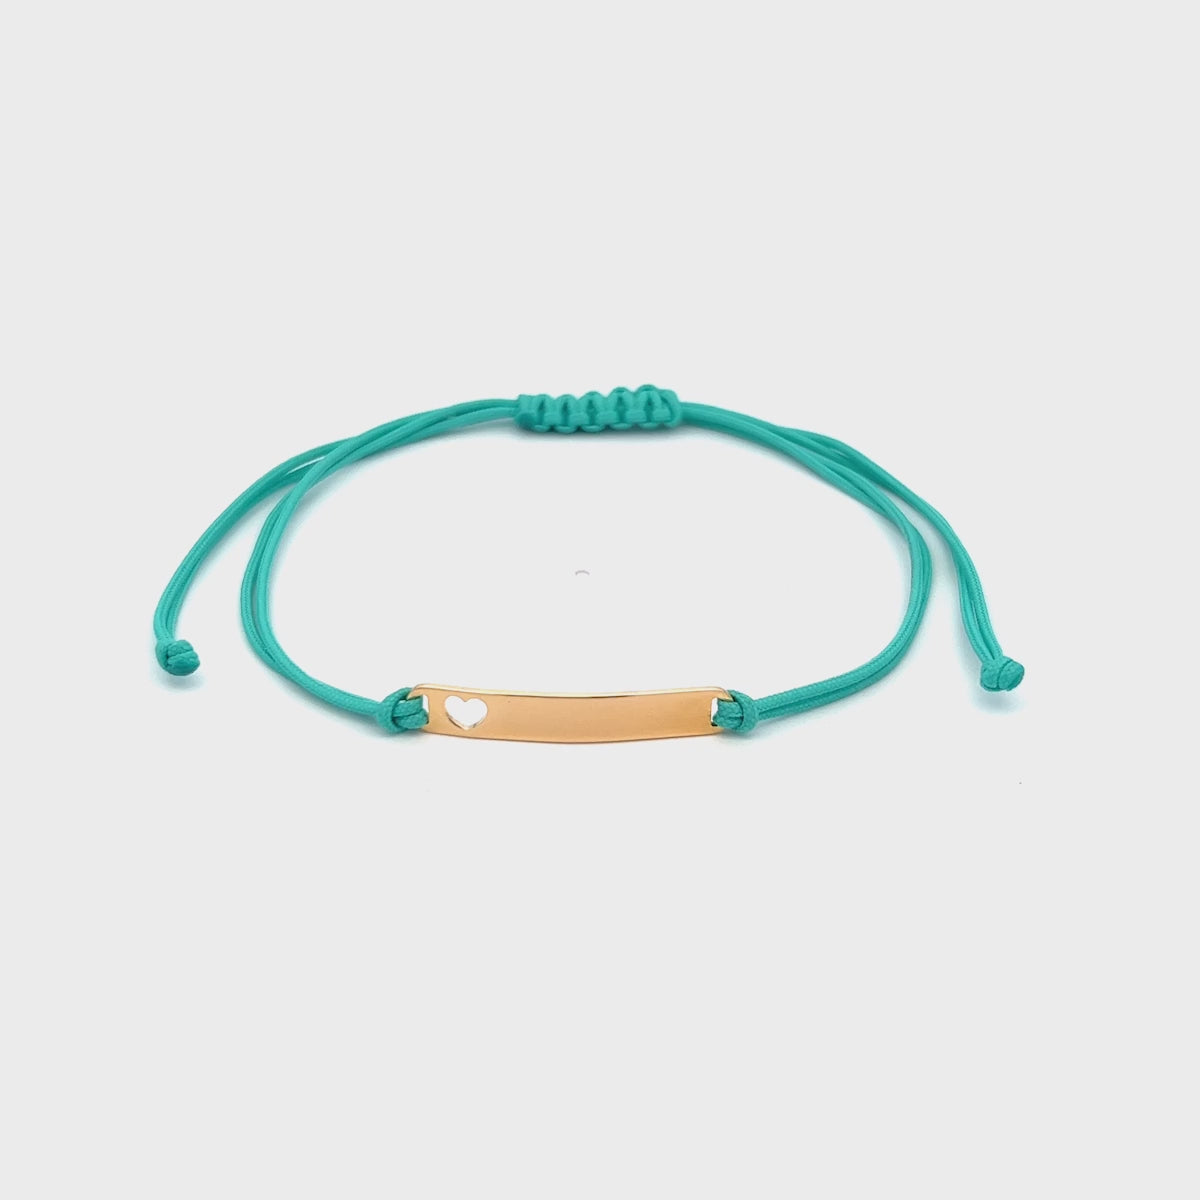 Anklets - Anklet in turquoise fabric and slab - Anklets Mania - thumbnail - video - 1 | Rue des Mille